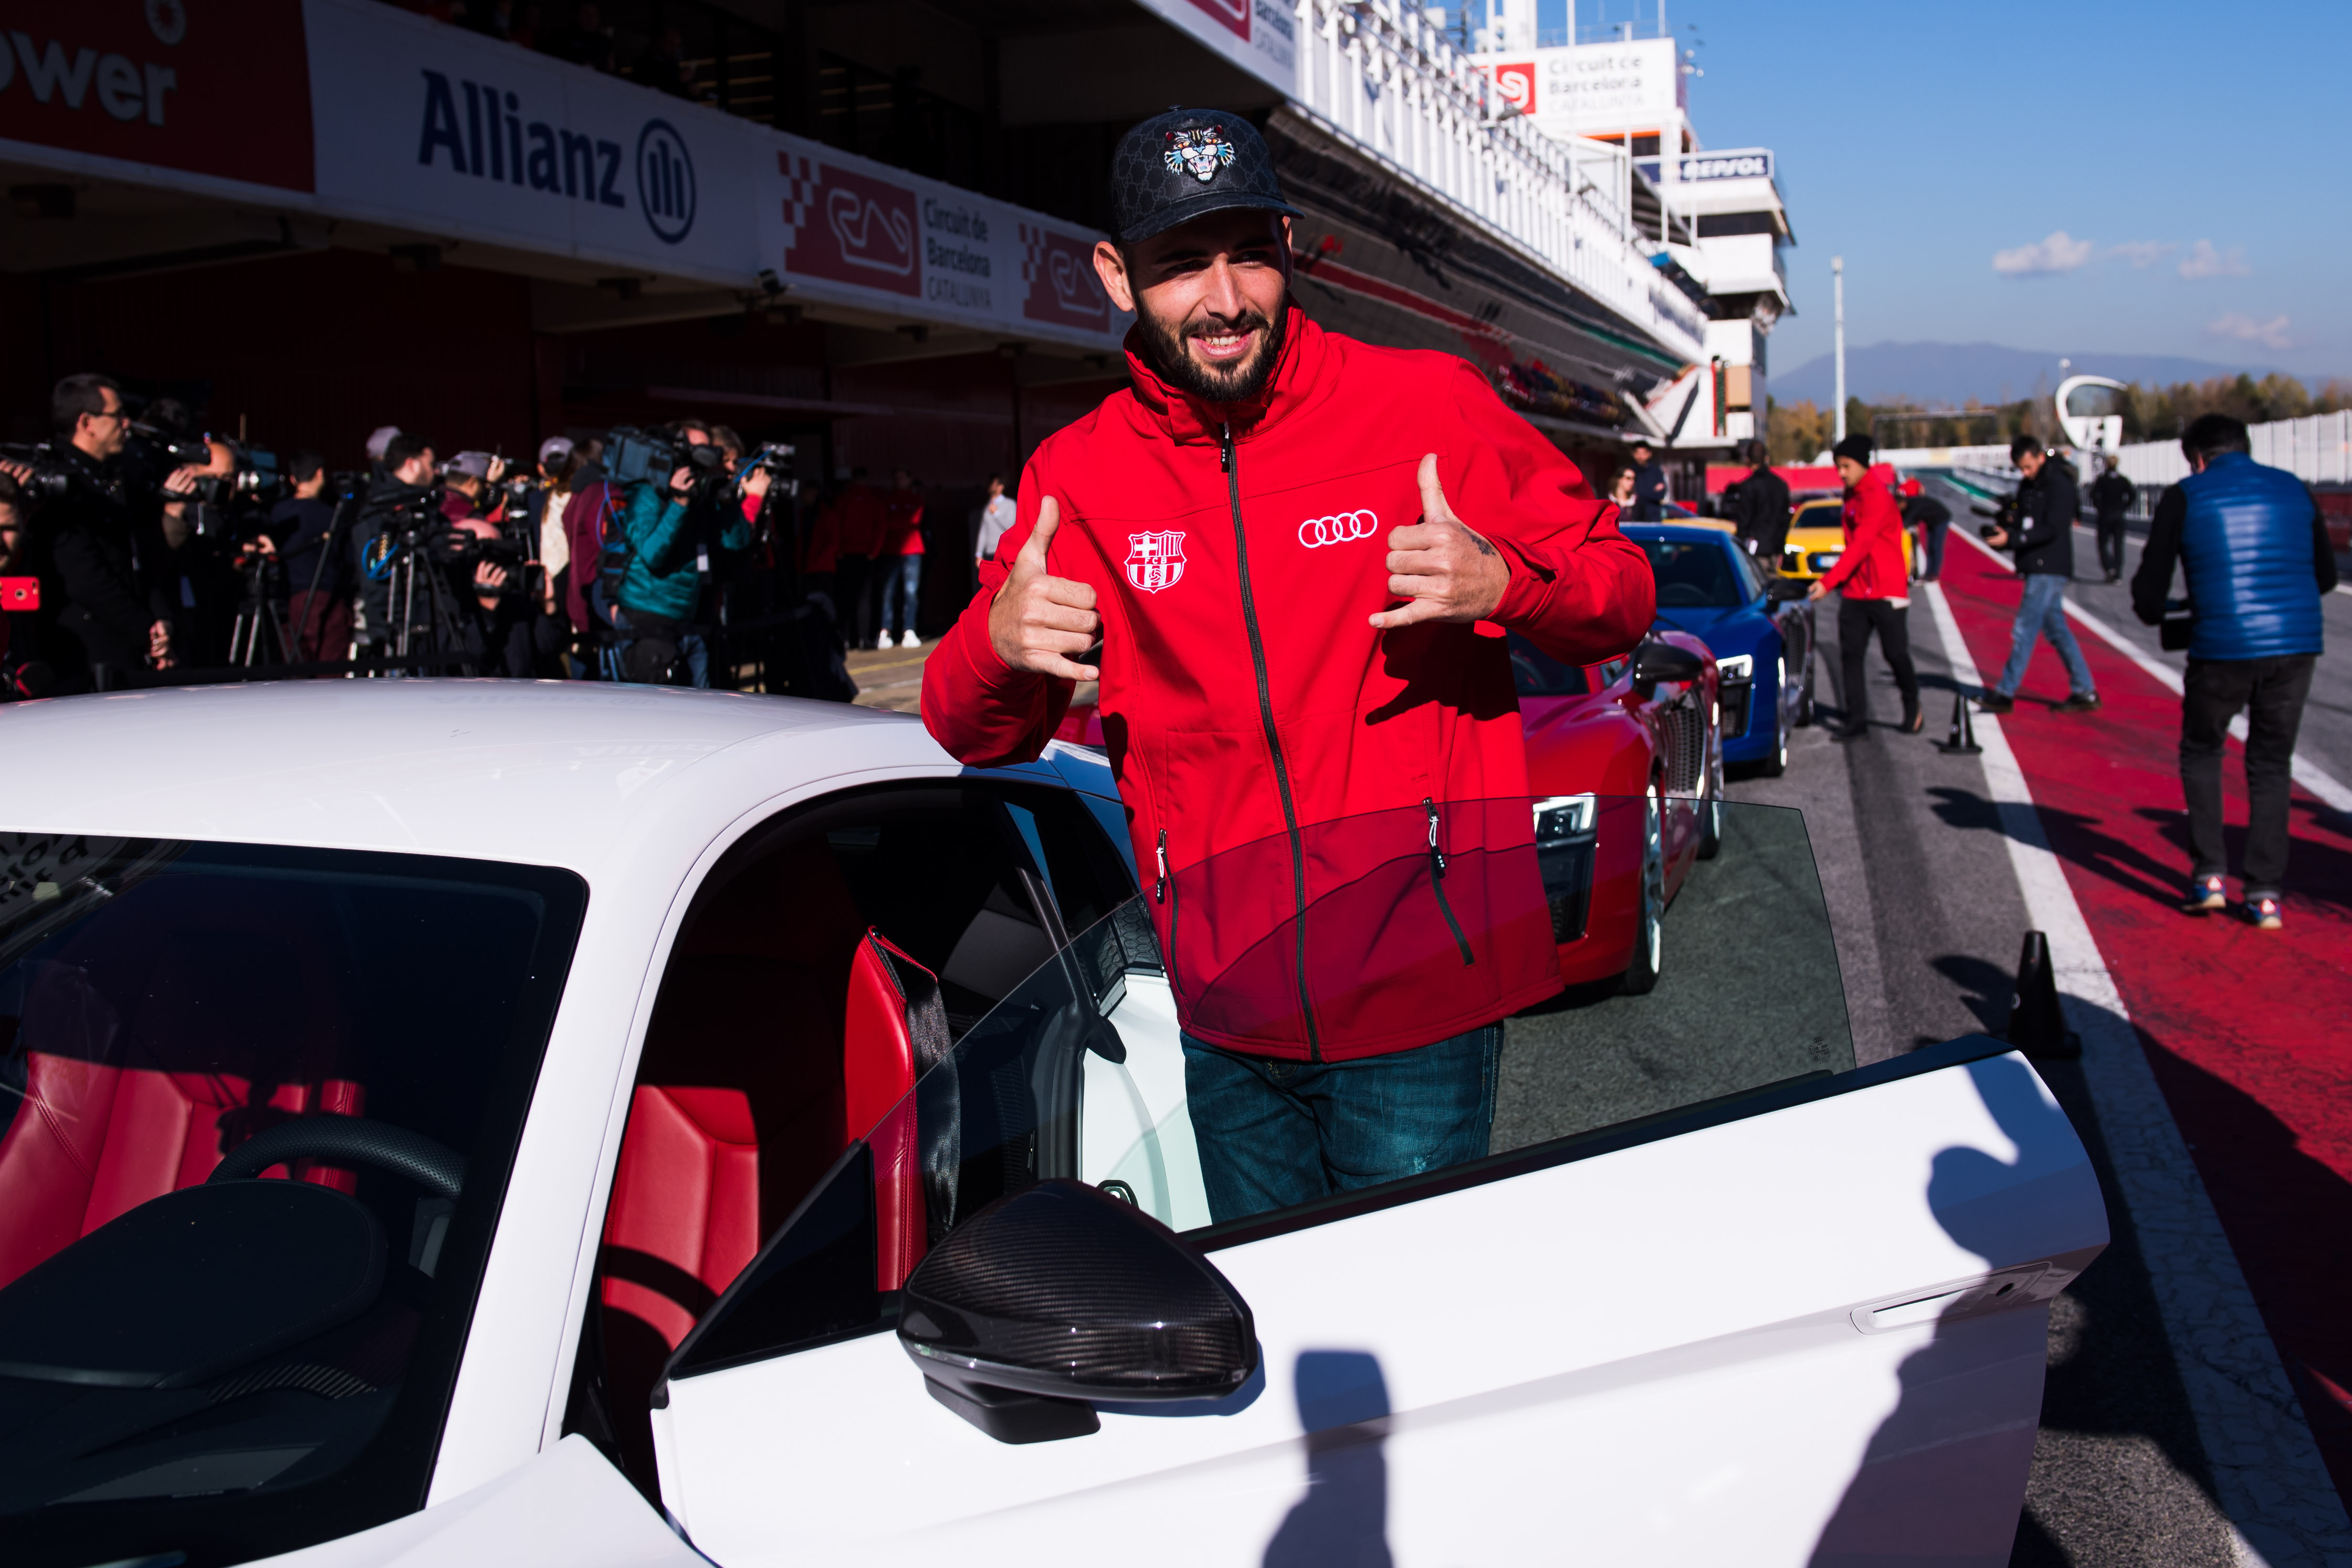 MONTMELO, SPAIN - NOVEMBER 30: Aleix Vidal of FC Barcelona prepares to enjoy the Audi Driving Experience during the Audi Car handover to the players of FC Barcelona on November 30, 2017 at Circuit de Barcelona-Catalunya in Montmelo, near Barcelona, Spain. (Photo by Alex Caparros/Getty Images for AUDI)